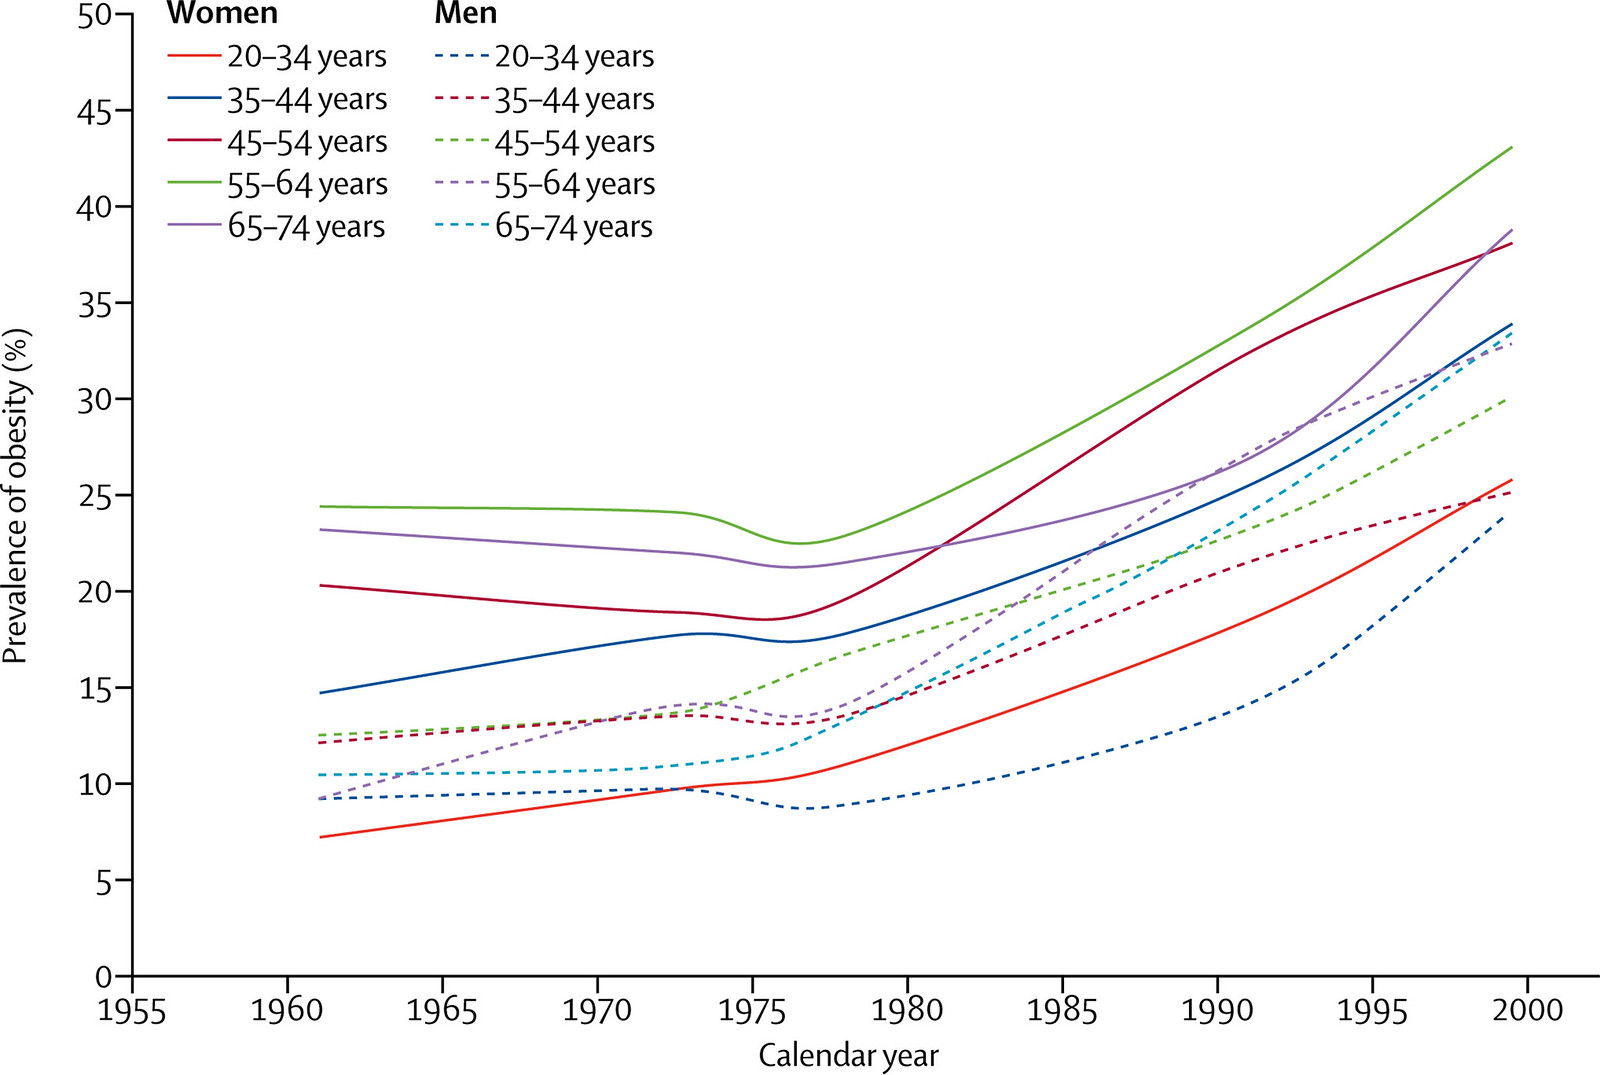 Rodgers A, Woodward A, Swinburn B, Dietz WH. Prevalence trends tell us what did not precipitate the US obesity epidemic-353